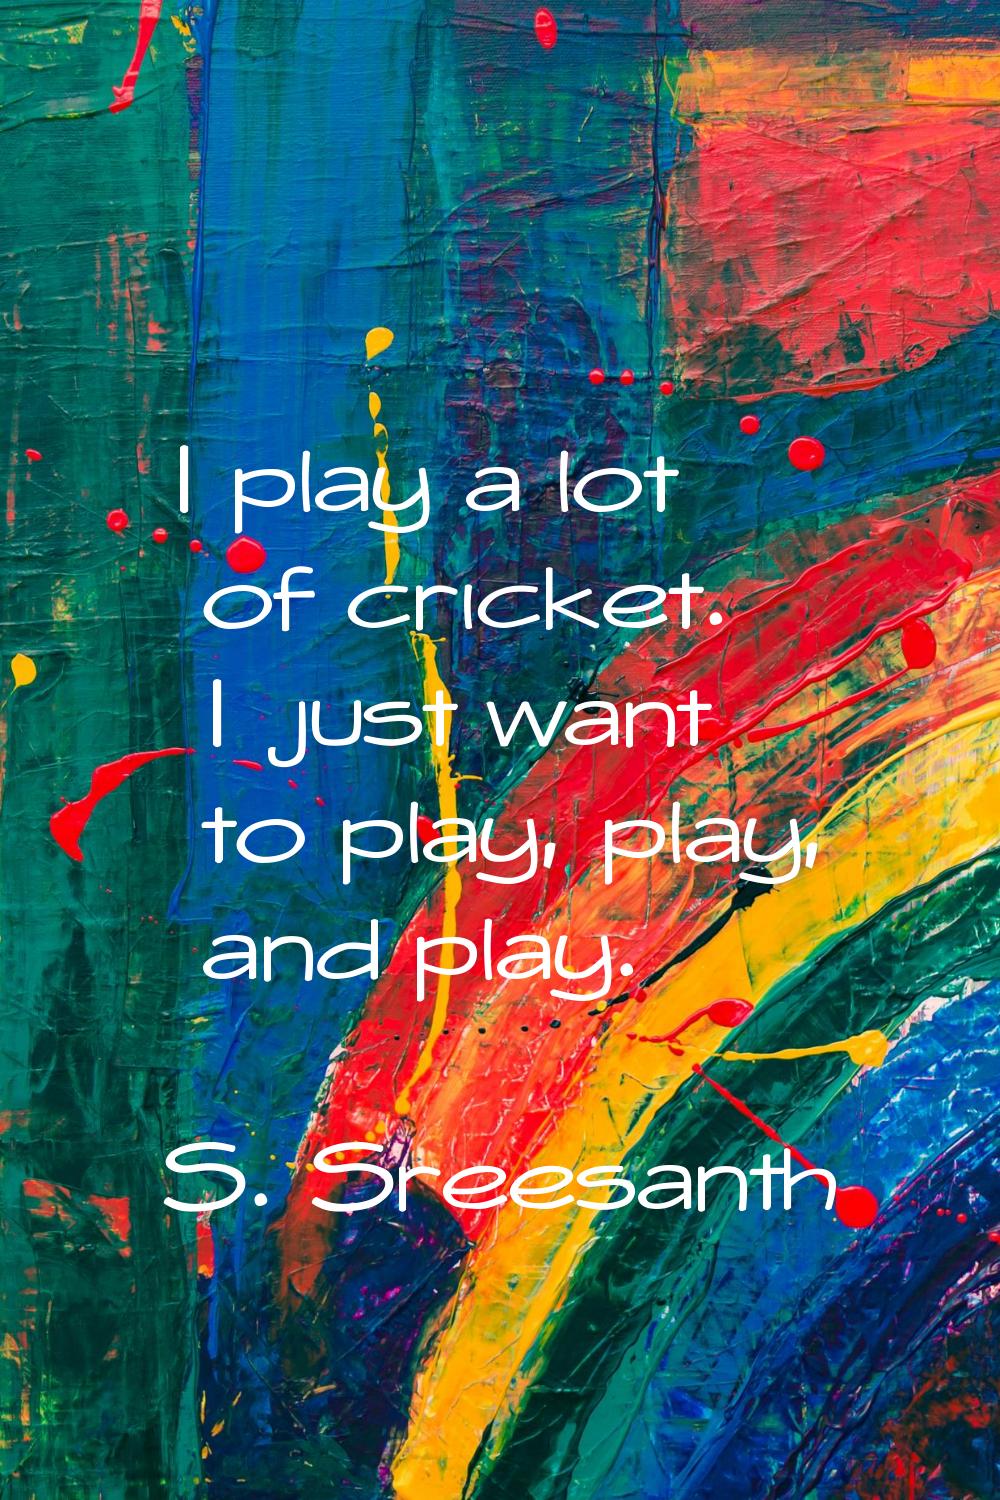 I play a lot of cricket. I just want to play, play, and play.